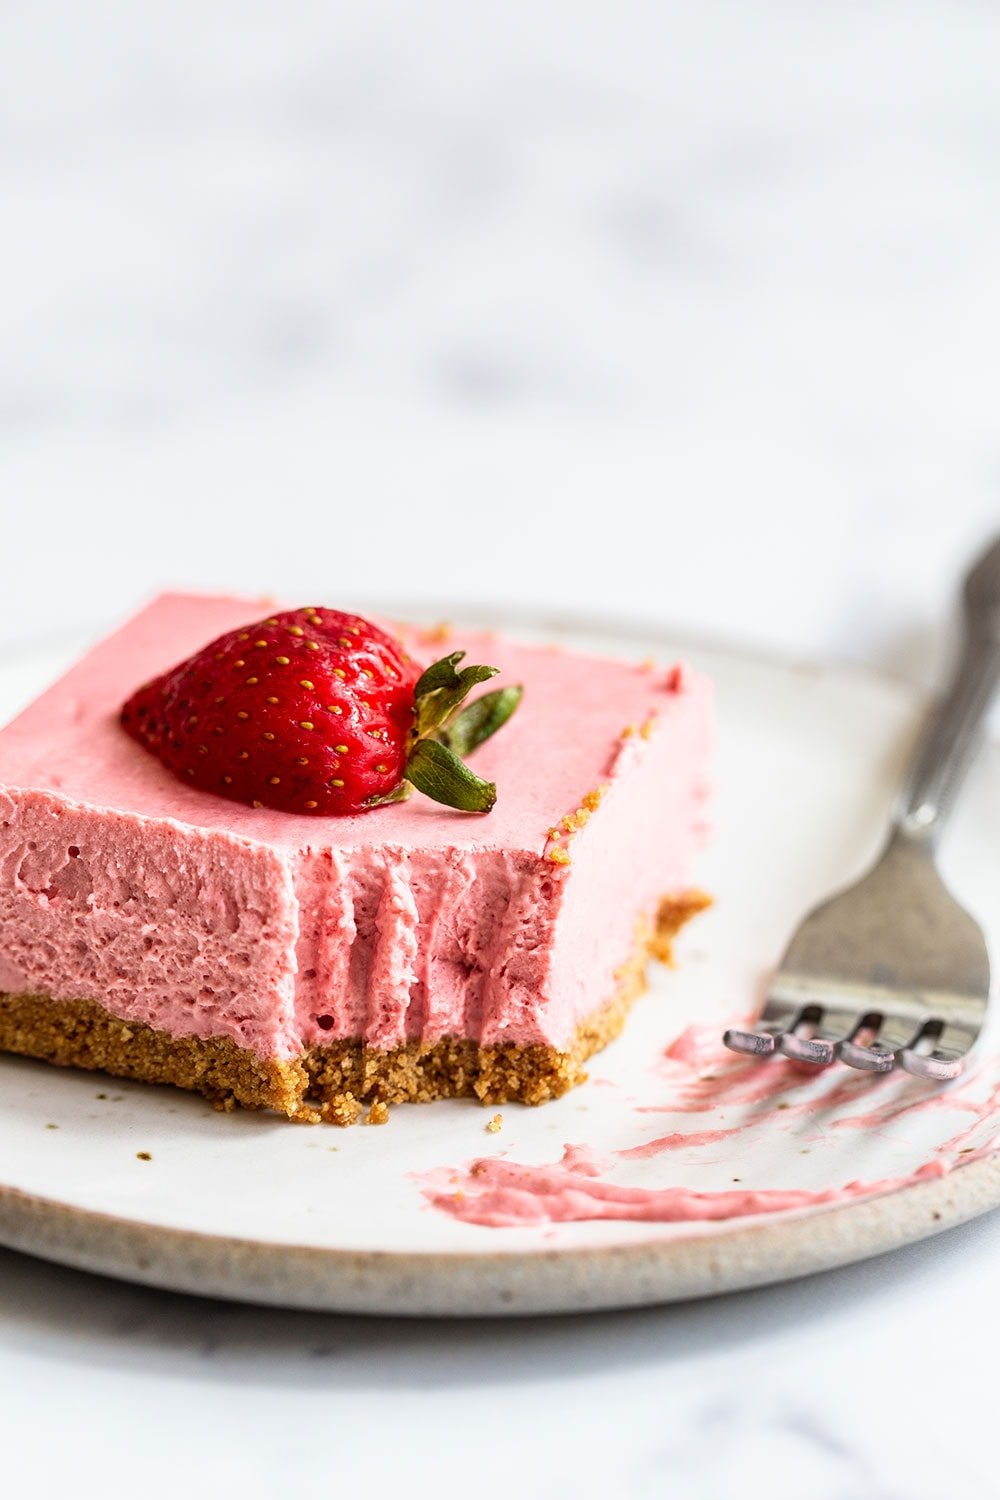 No Bake Strawberry Cheesecake Bars Handle The Heat,Sympathy Message To A Friend